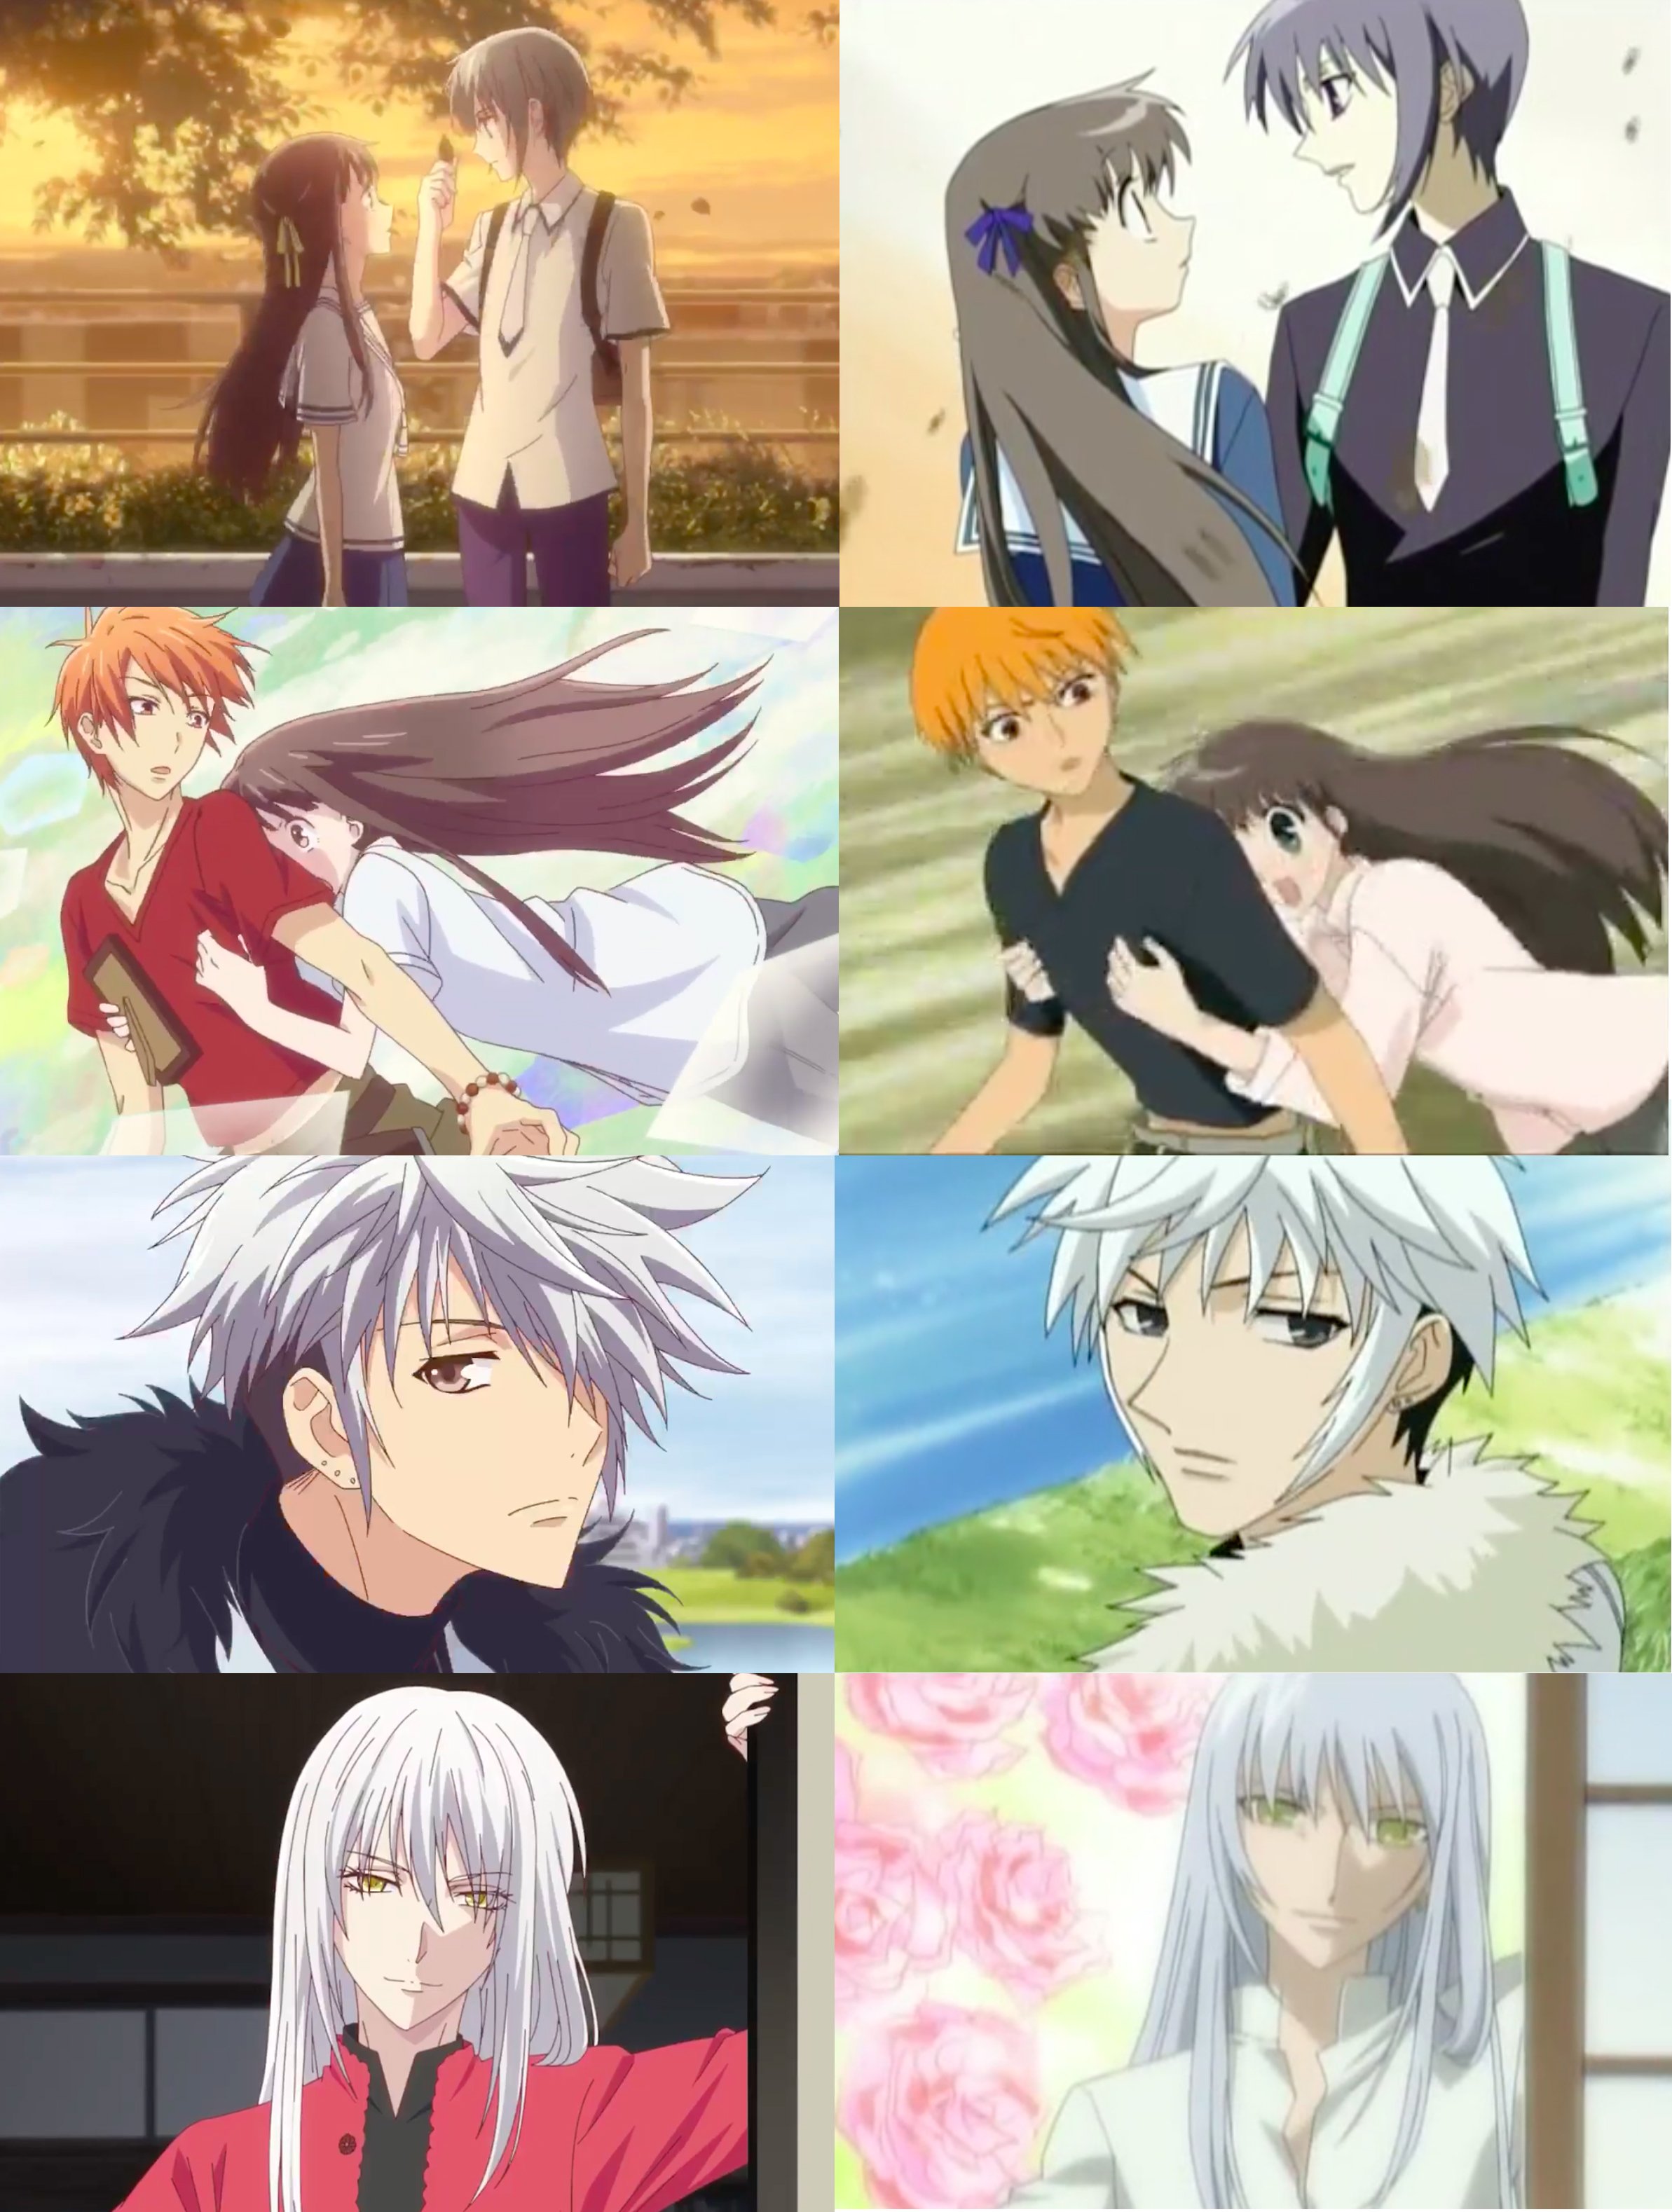 Fruits Basket: Differences Between the 2001 and 2019 Version